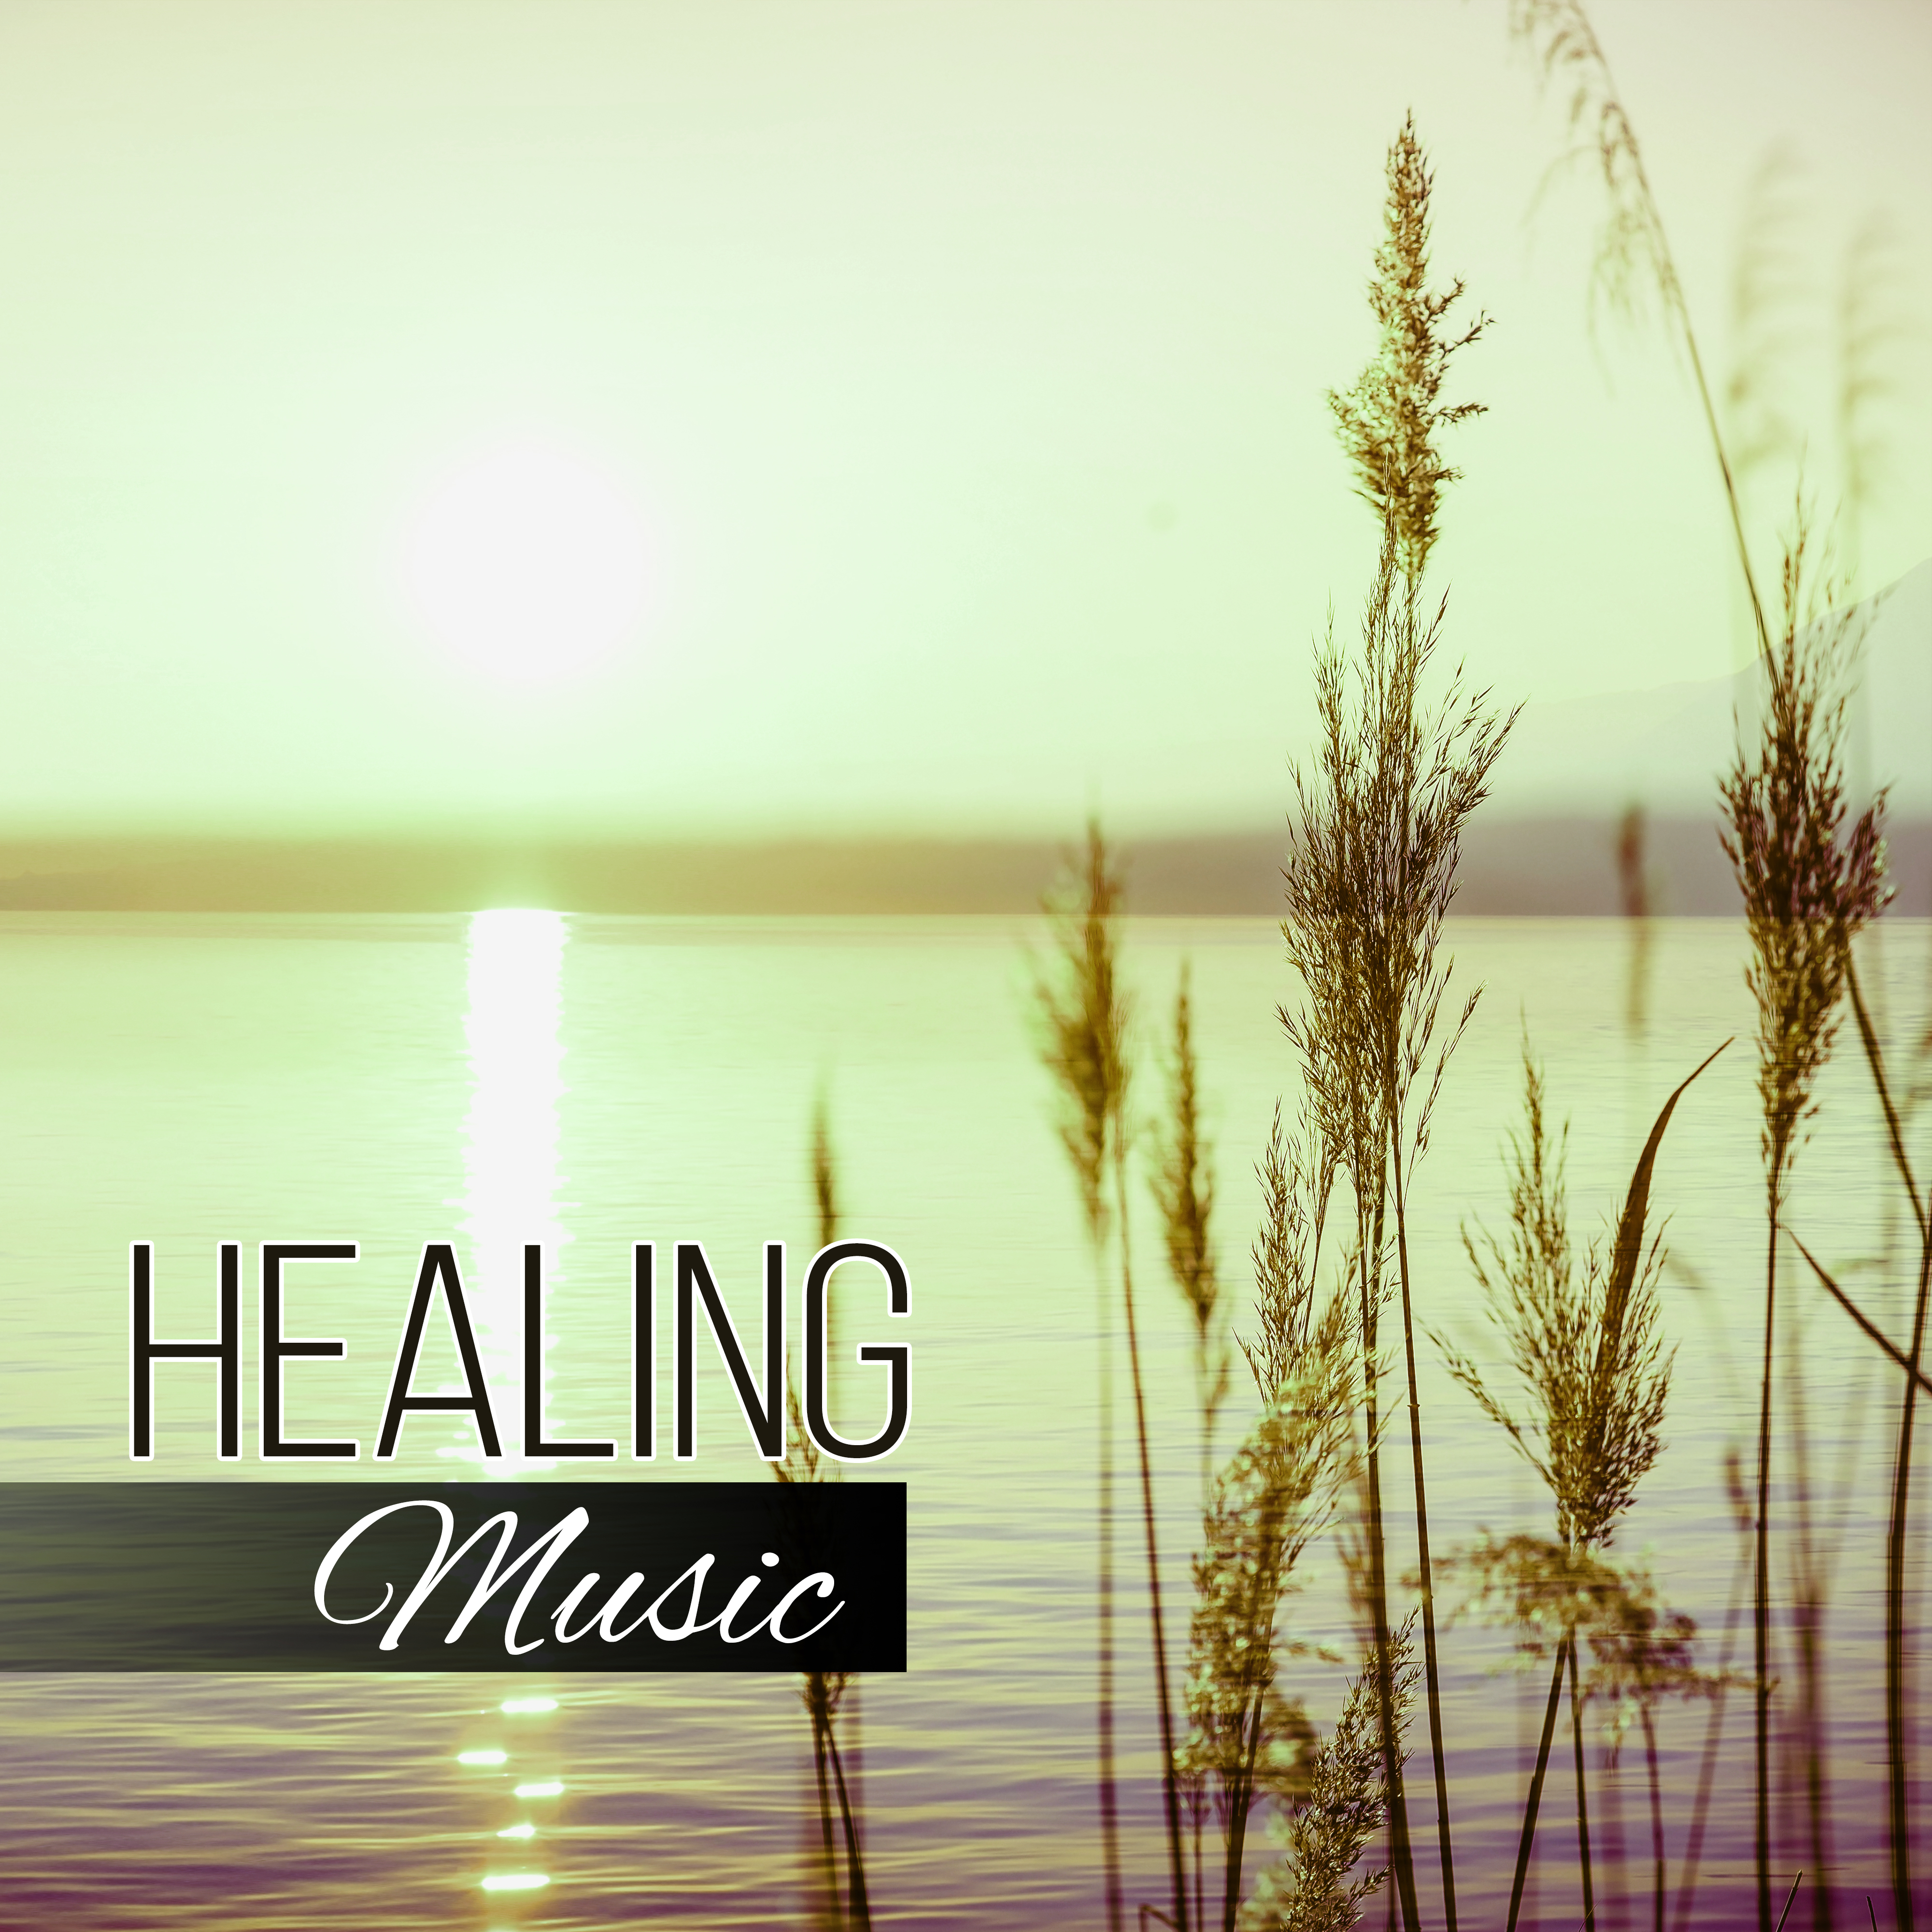 Healing Music - New Age Music to Relax, Healing Sounds to Cure Insomnia, Chanting Om with Yoga Meditation, White Noises for Deep Sleep, Spiritual Reflections, Relaxation and Chill Out